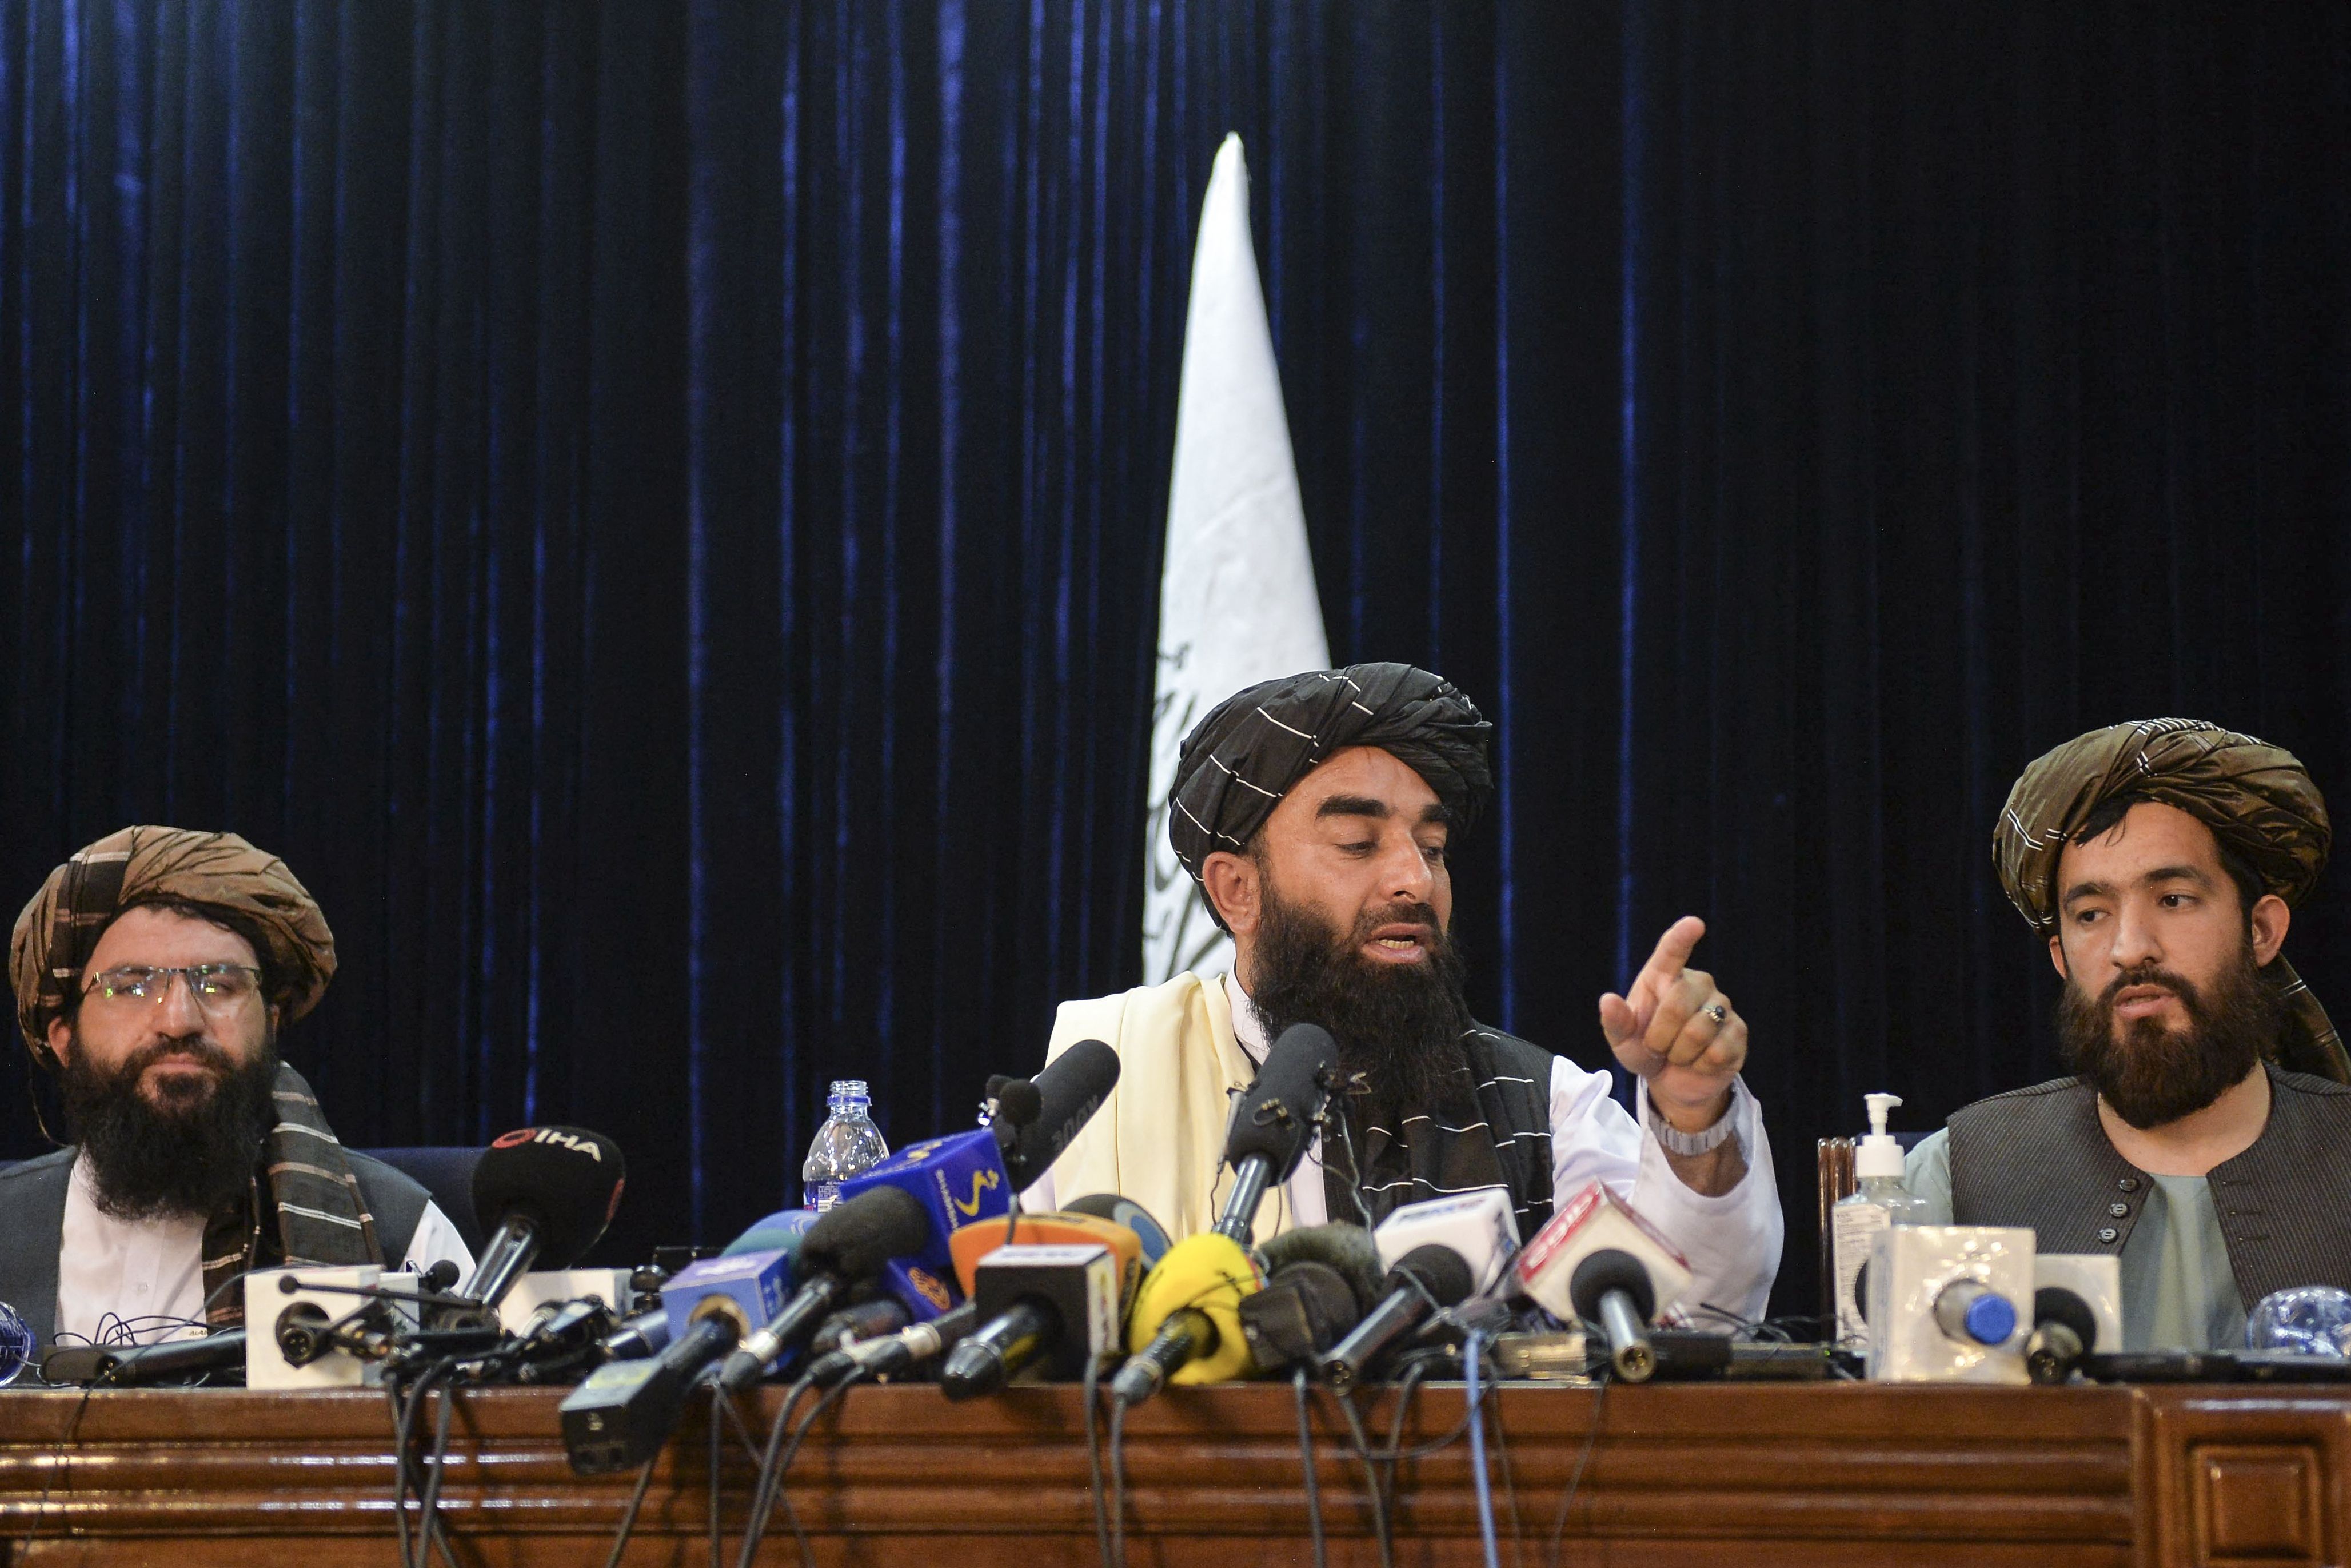 Taliban spokesperson Zabihullah Mujahid (C) gestures as he addresses the first press conference in Kabul on August 17, 2021 following the Taliban stunning takeover of Afghanistan. (AFP Photo)